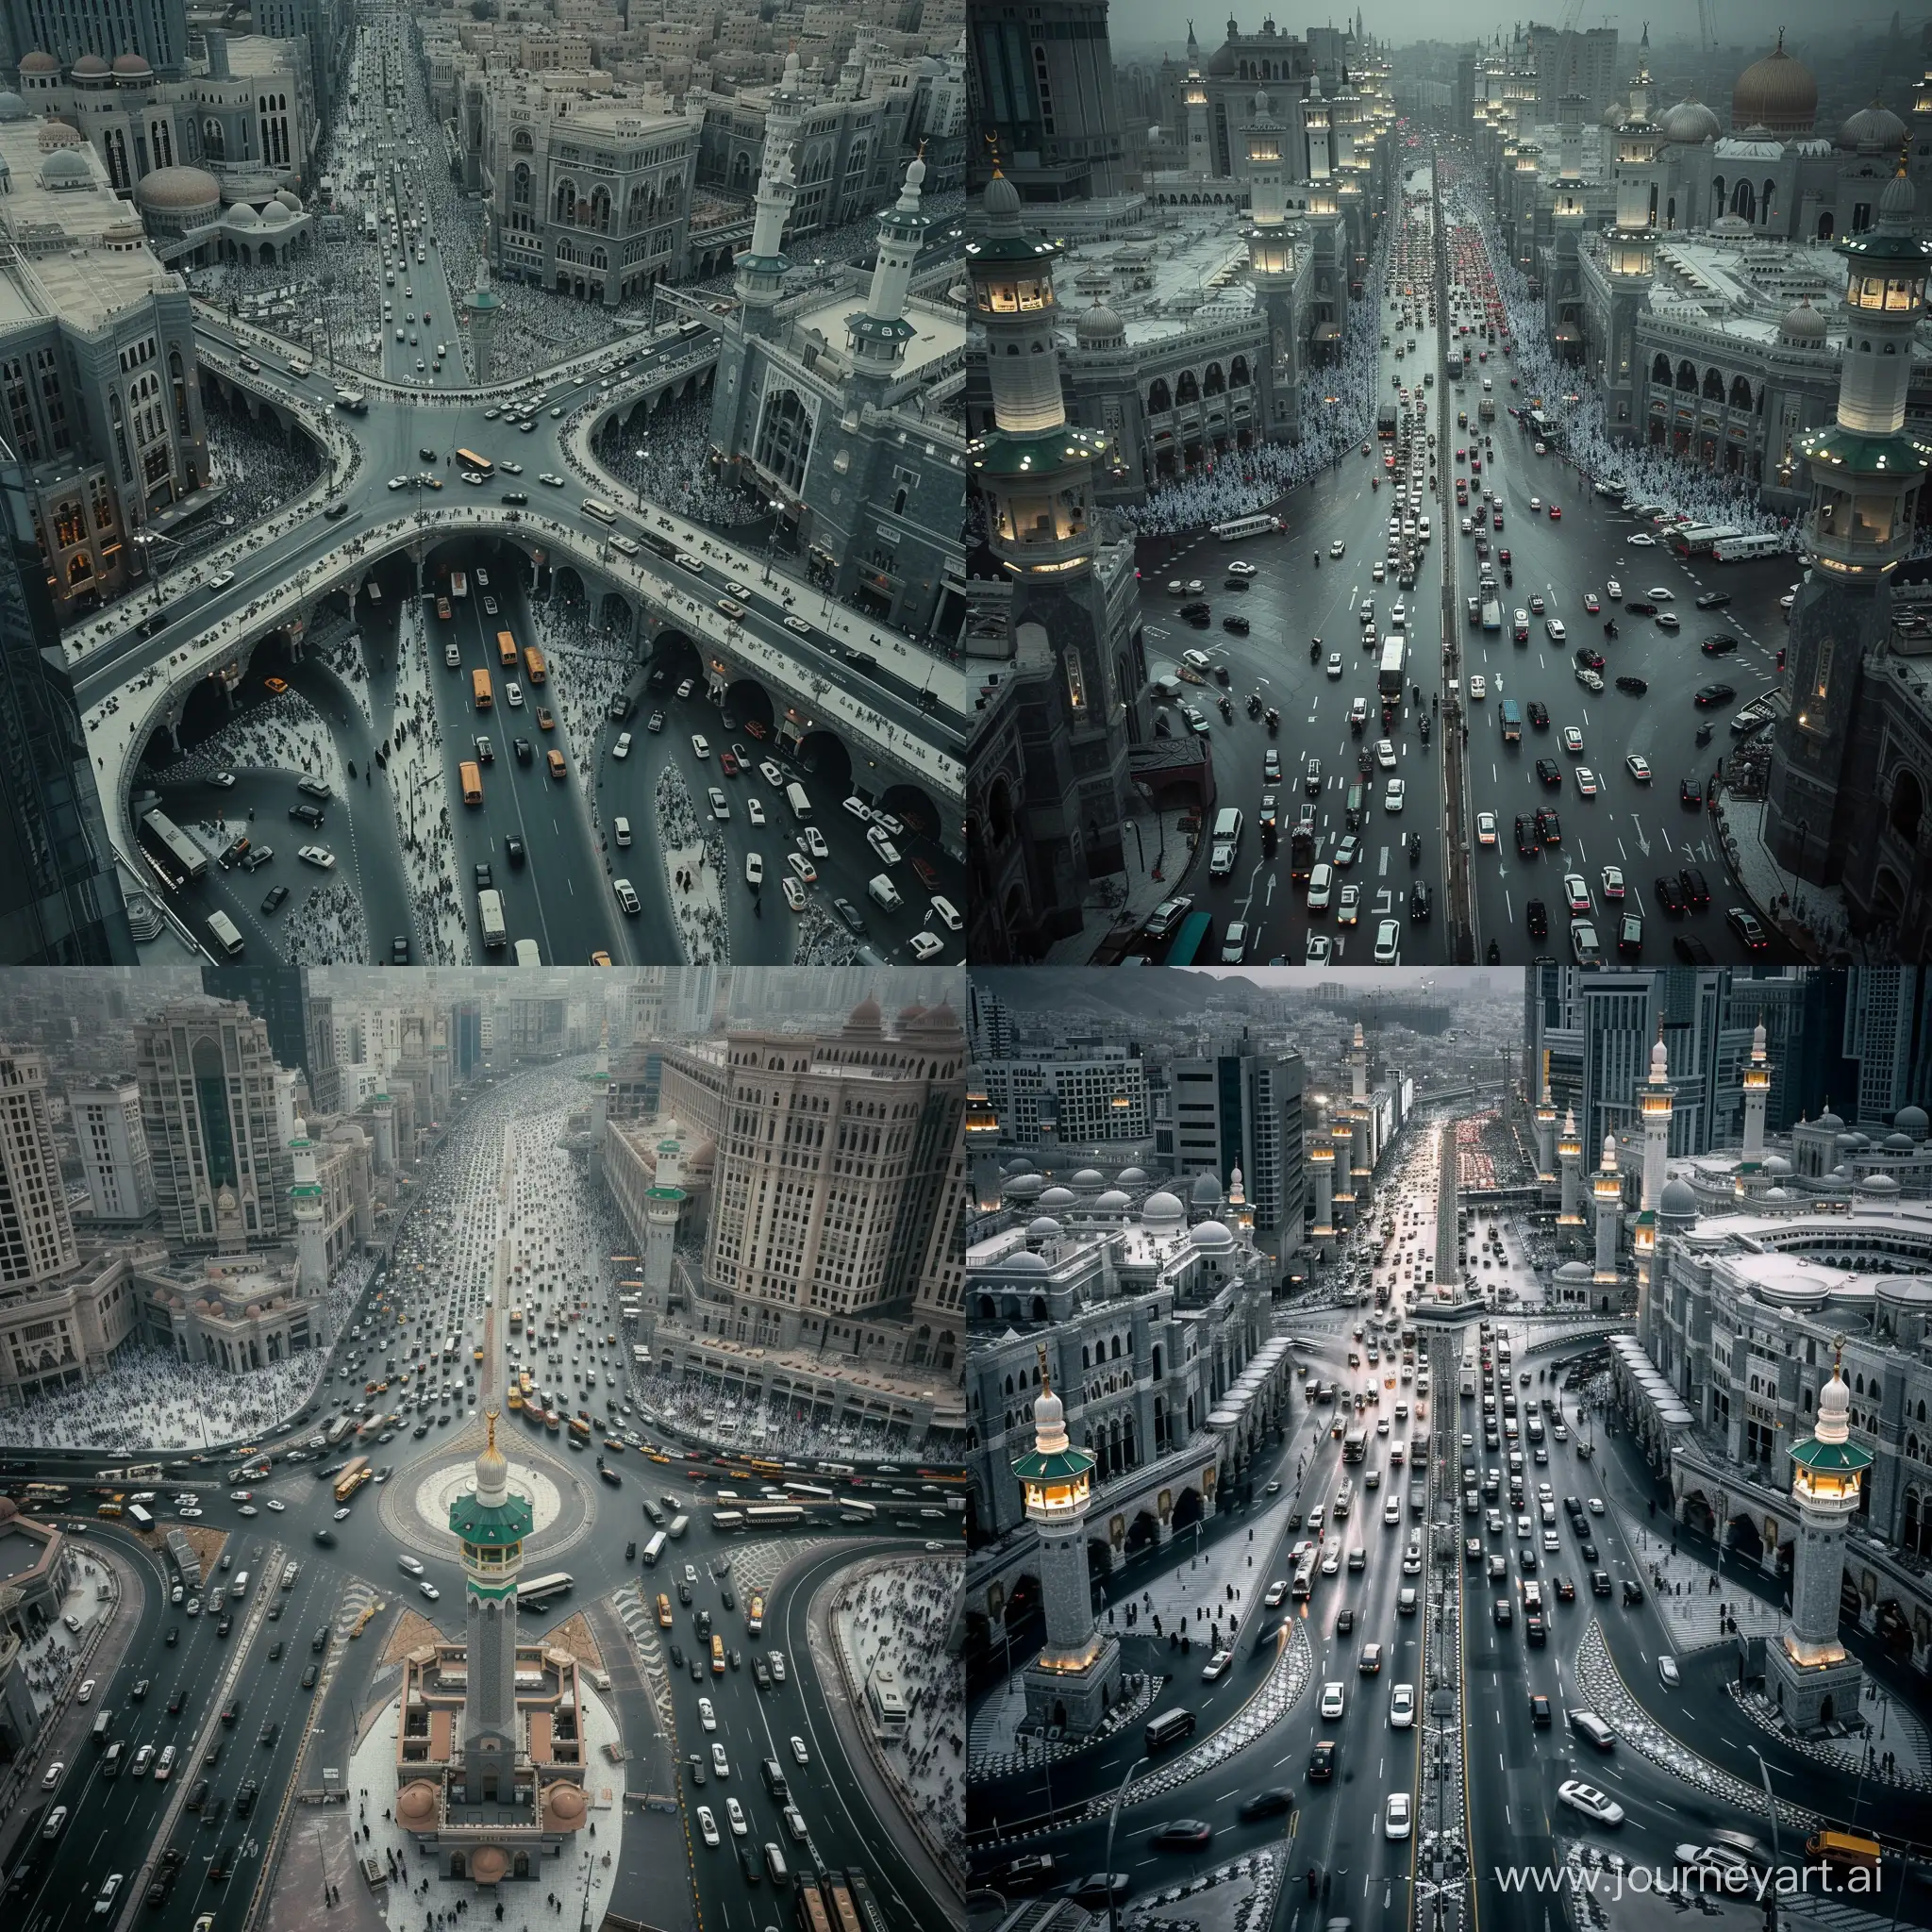 Busy-Crossroad-Intersection-with-Masjid-al-Haram-Style-Mosques